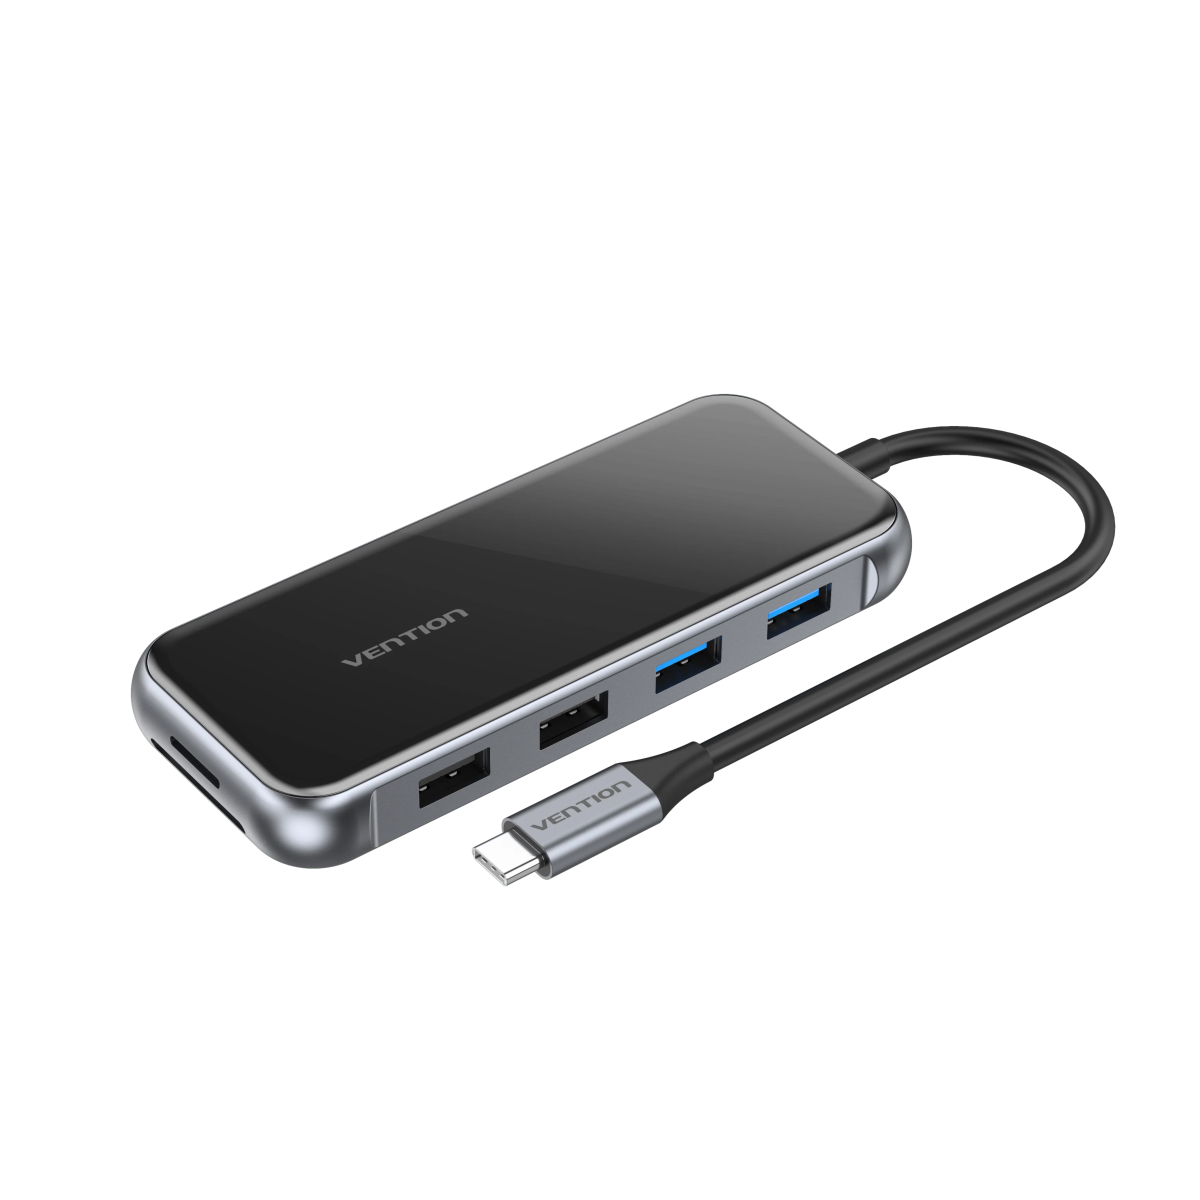 Vention USB-C MULTI-FUNCTIONAL 10 in 1 DOCKING STATION TYPE C to HDMI/ VGA/USB3.0*2/USB2.0*2/RJ45/TF/SD/PD (87W) Docking Station 0.15M Gray Mirrored Surface Type - Vertexhub Shop-vention